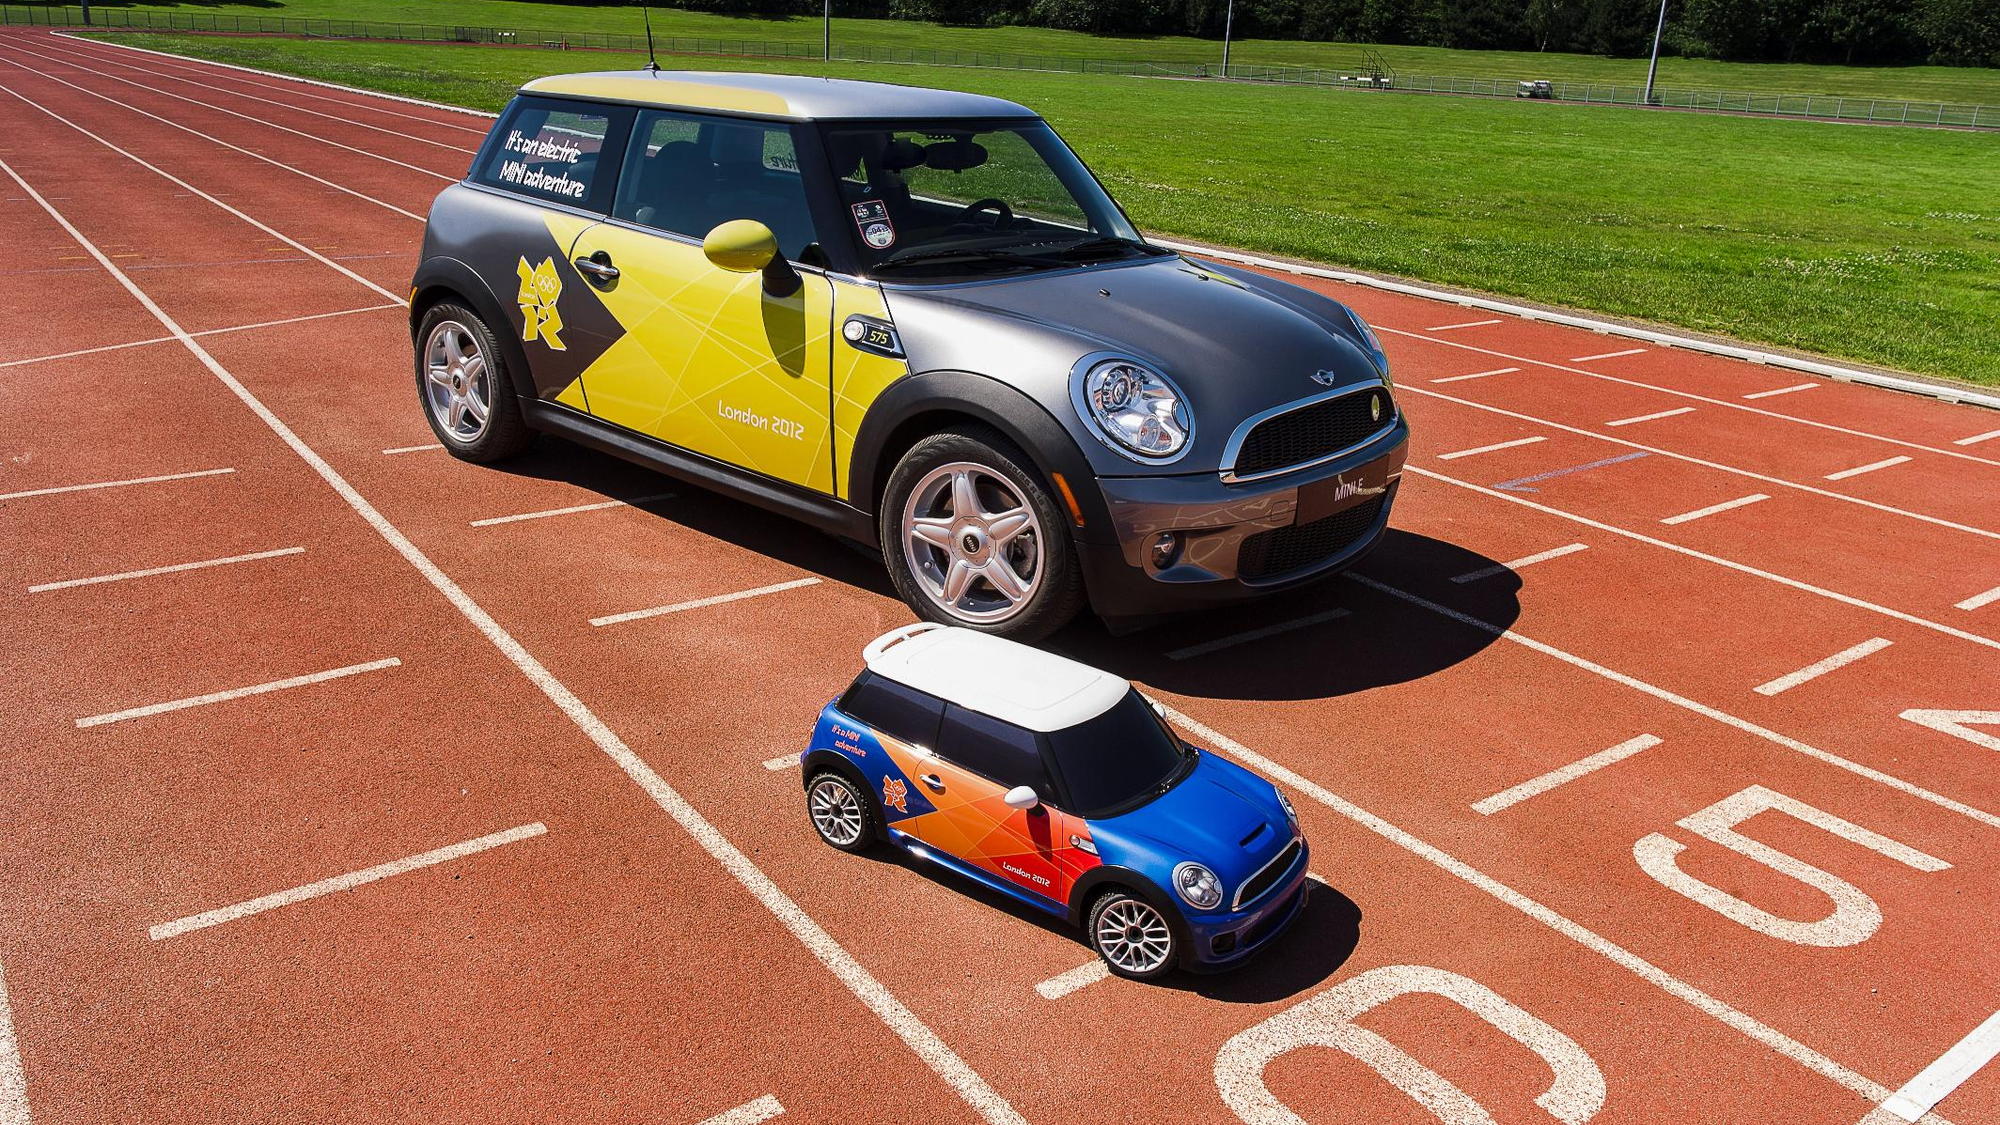 BMW's London 2012 Olympic remote control MINIs